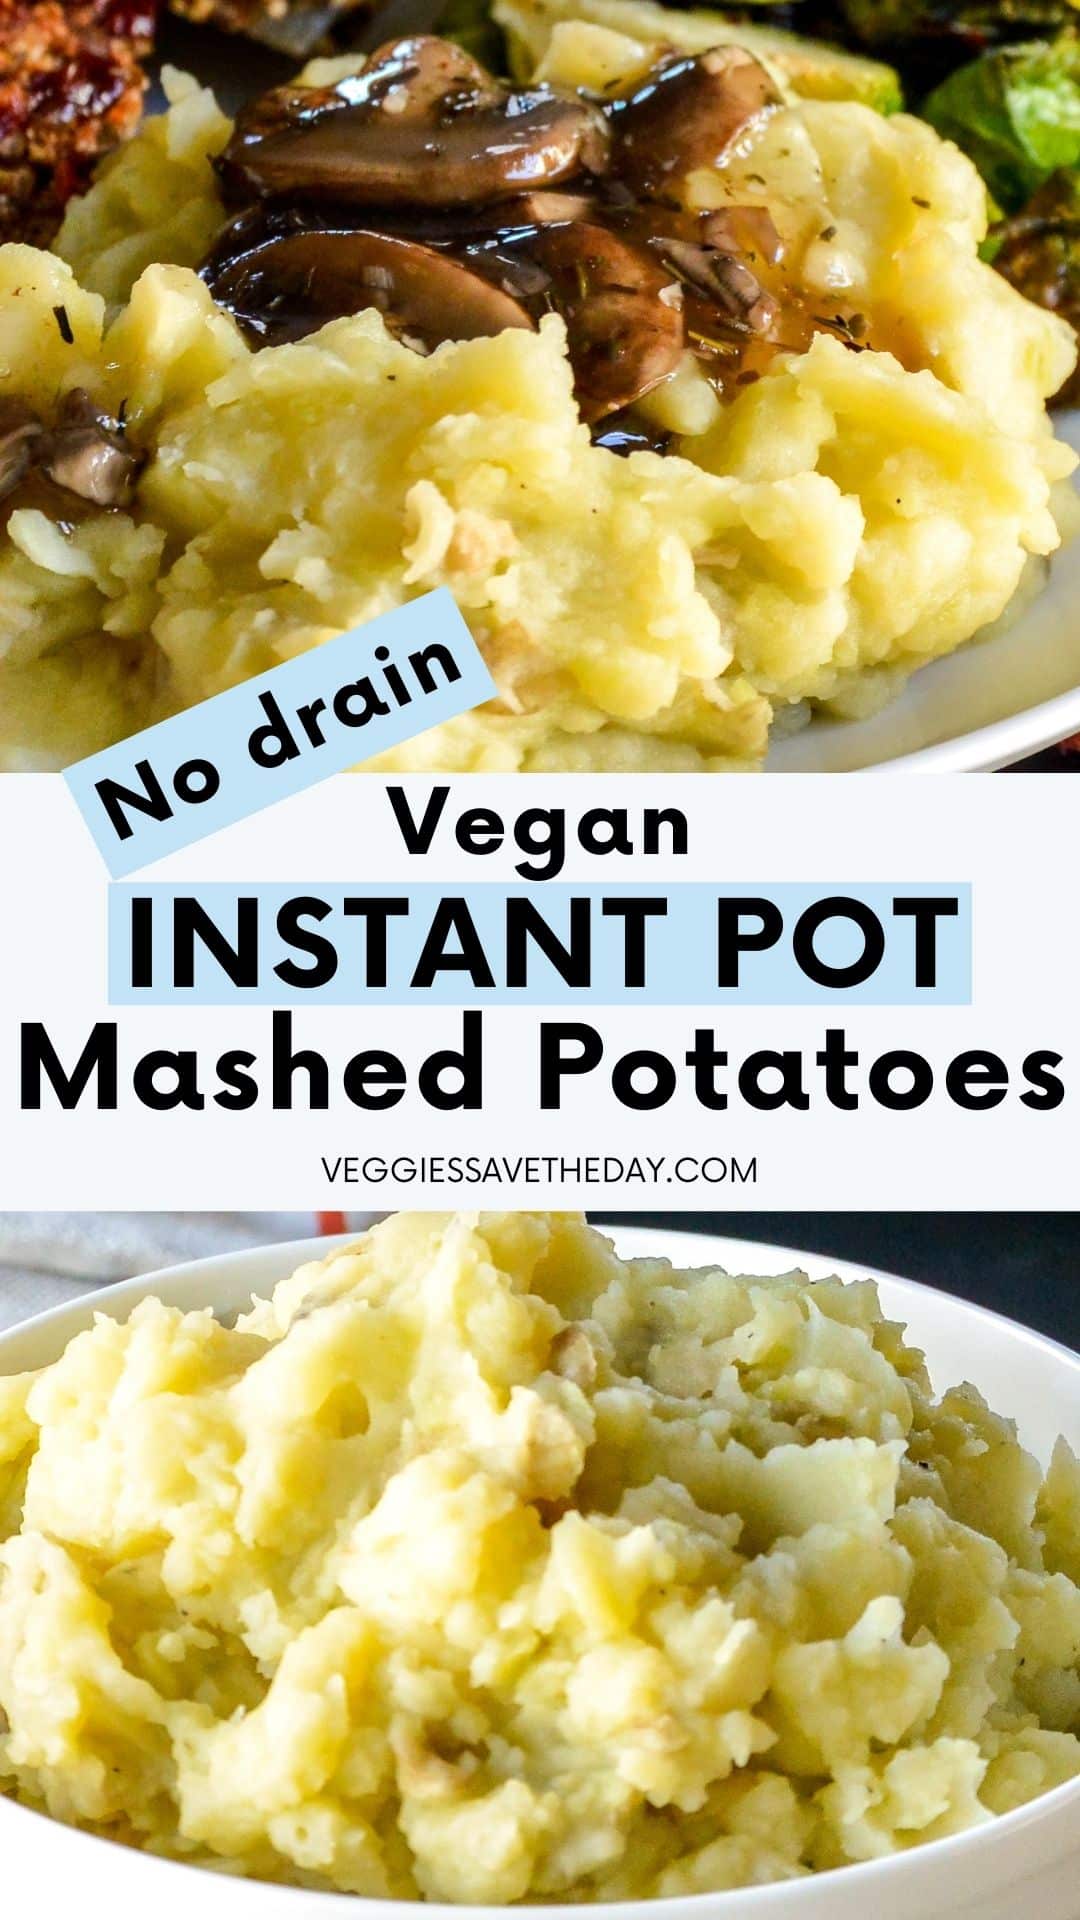 Mashed potatoes topped with mushroom gravy in top image and bowl of mashed potatoes in bottom image.